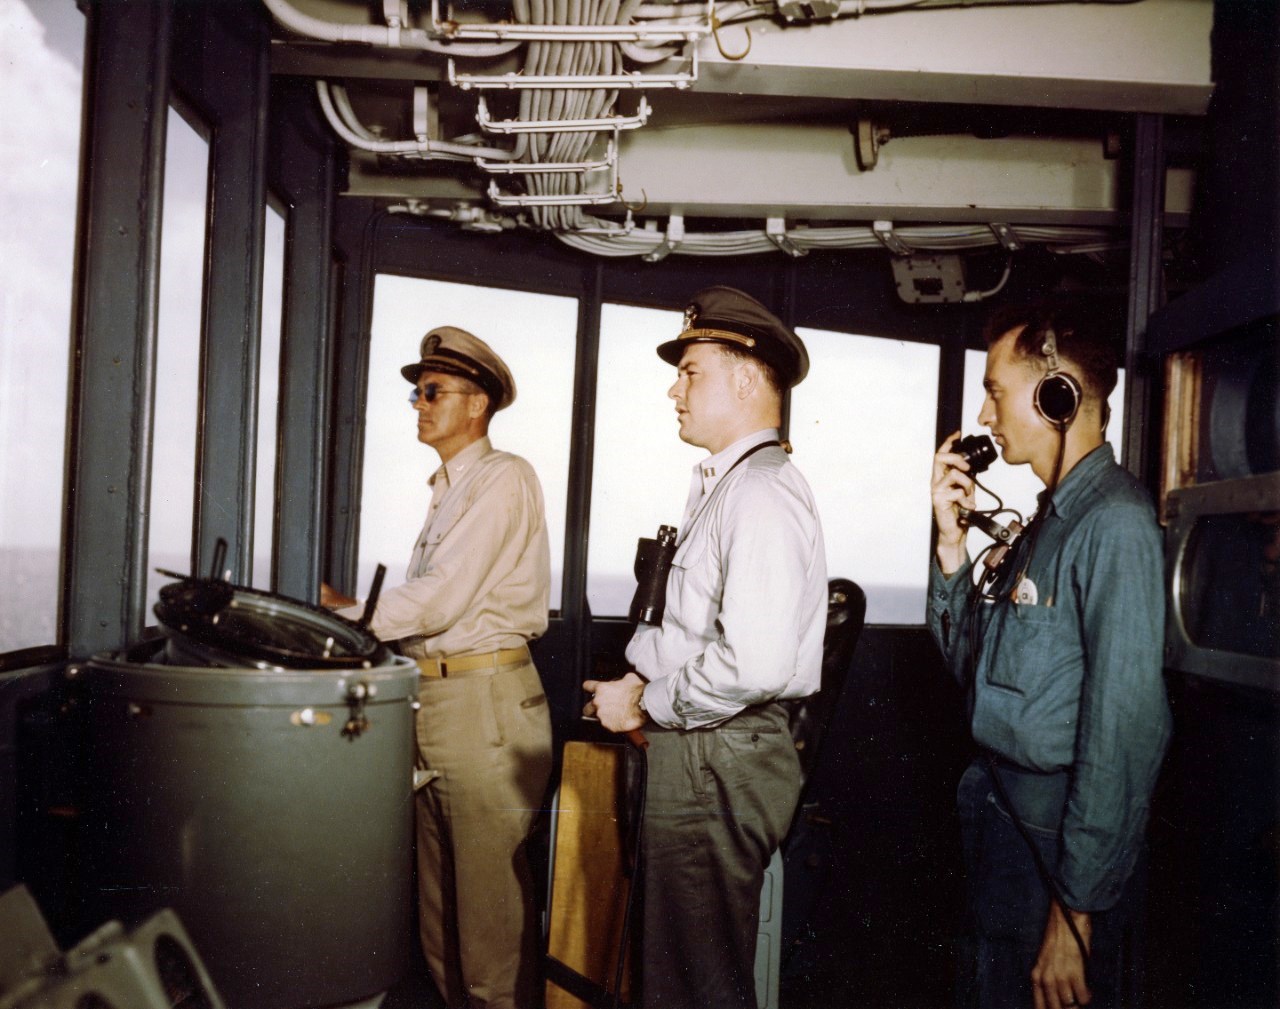 Bridge watch aboard the USS Missouri during the battleship’s shakedown cruise to Trinidad, Aug 1944: commanding officer Capt William M Callaghan, Officer of the Deck Lt Morris R Eddy, and Yeoman 1st class Arthur Colton